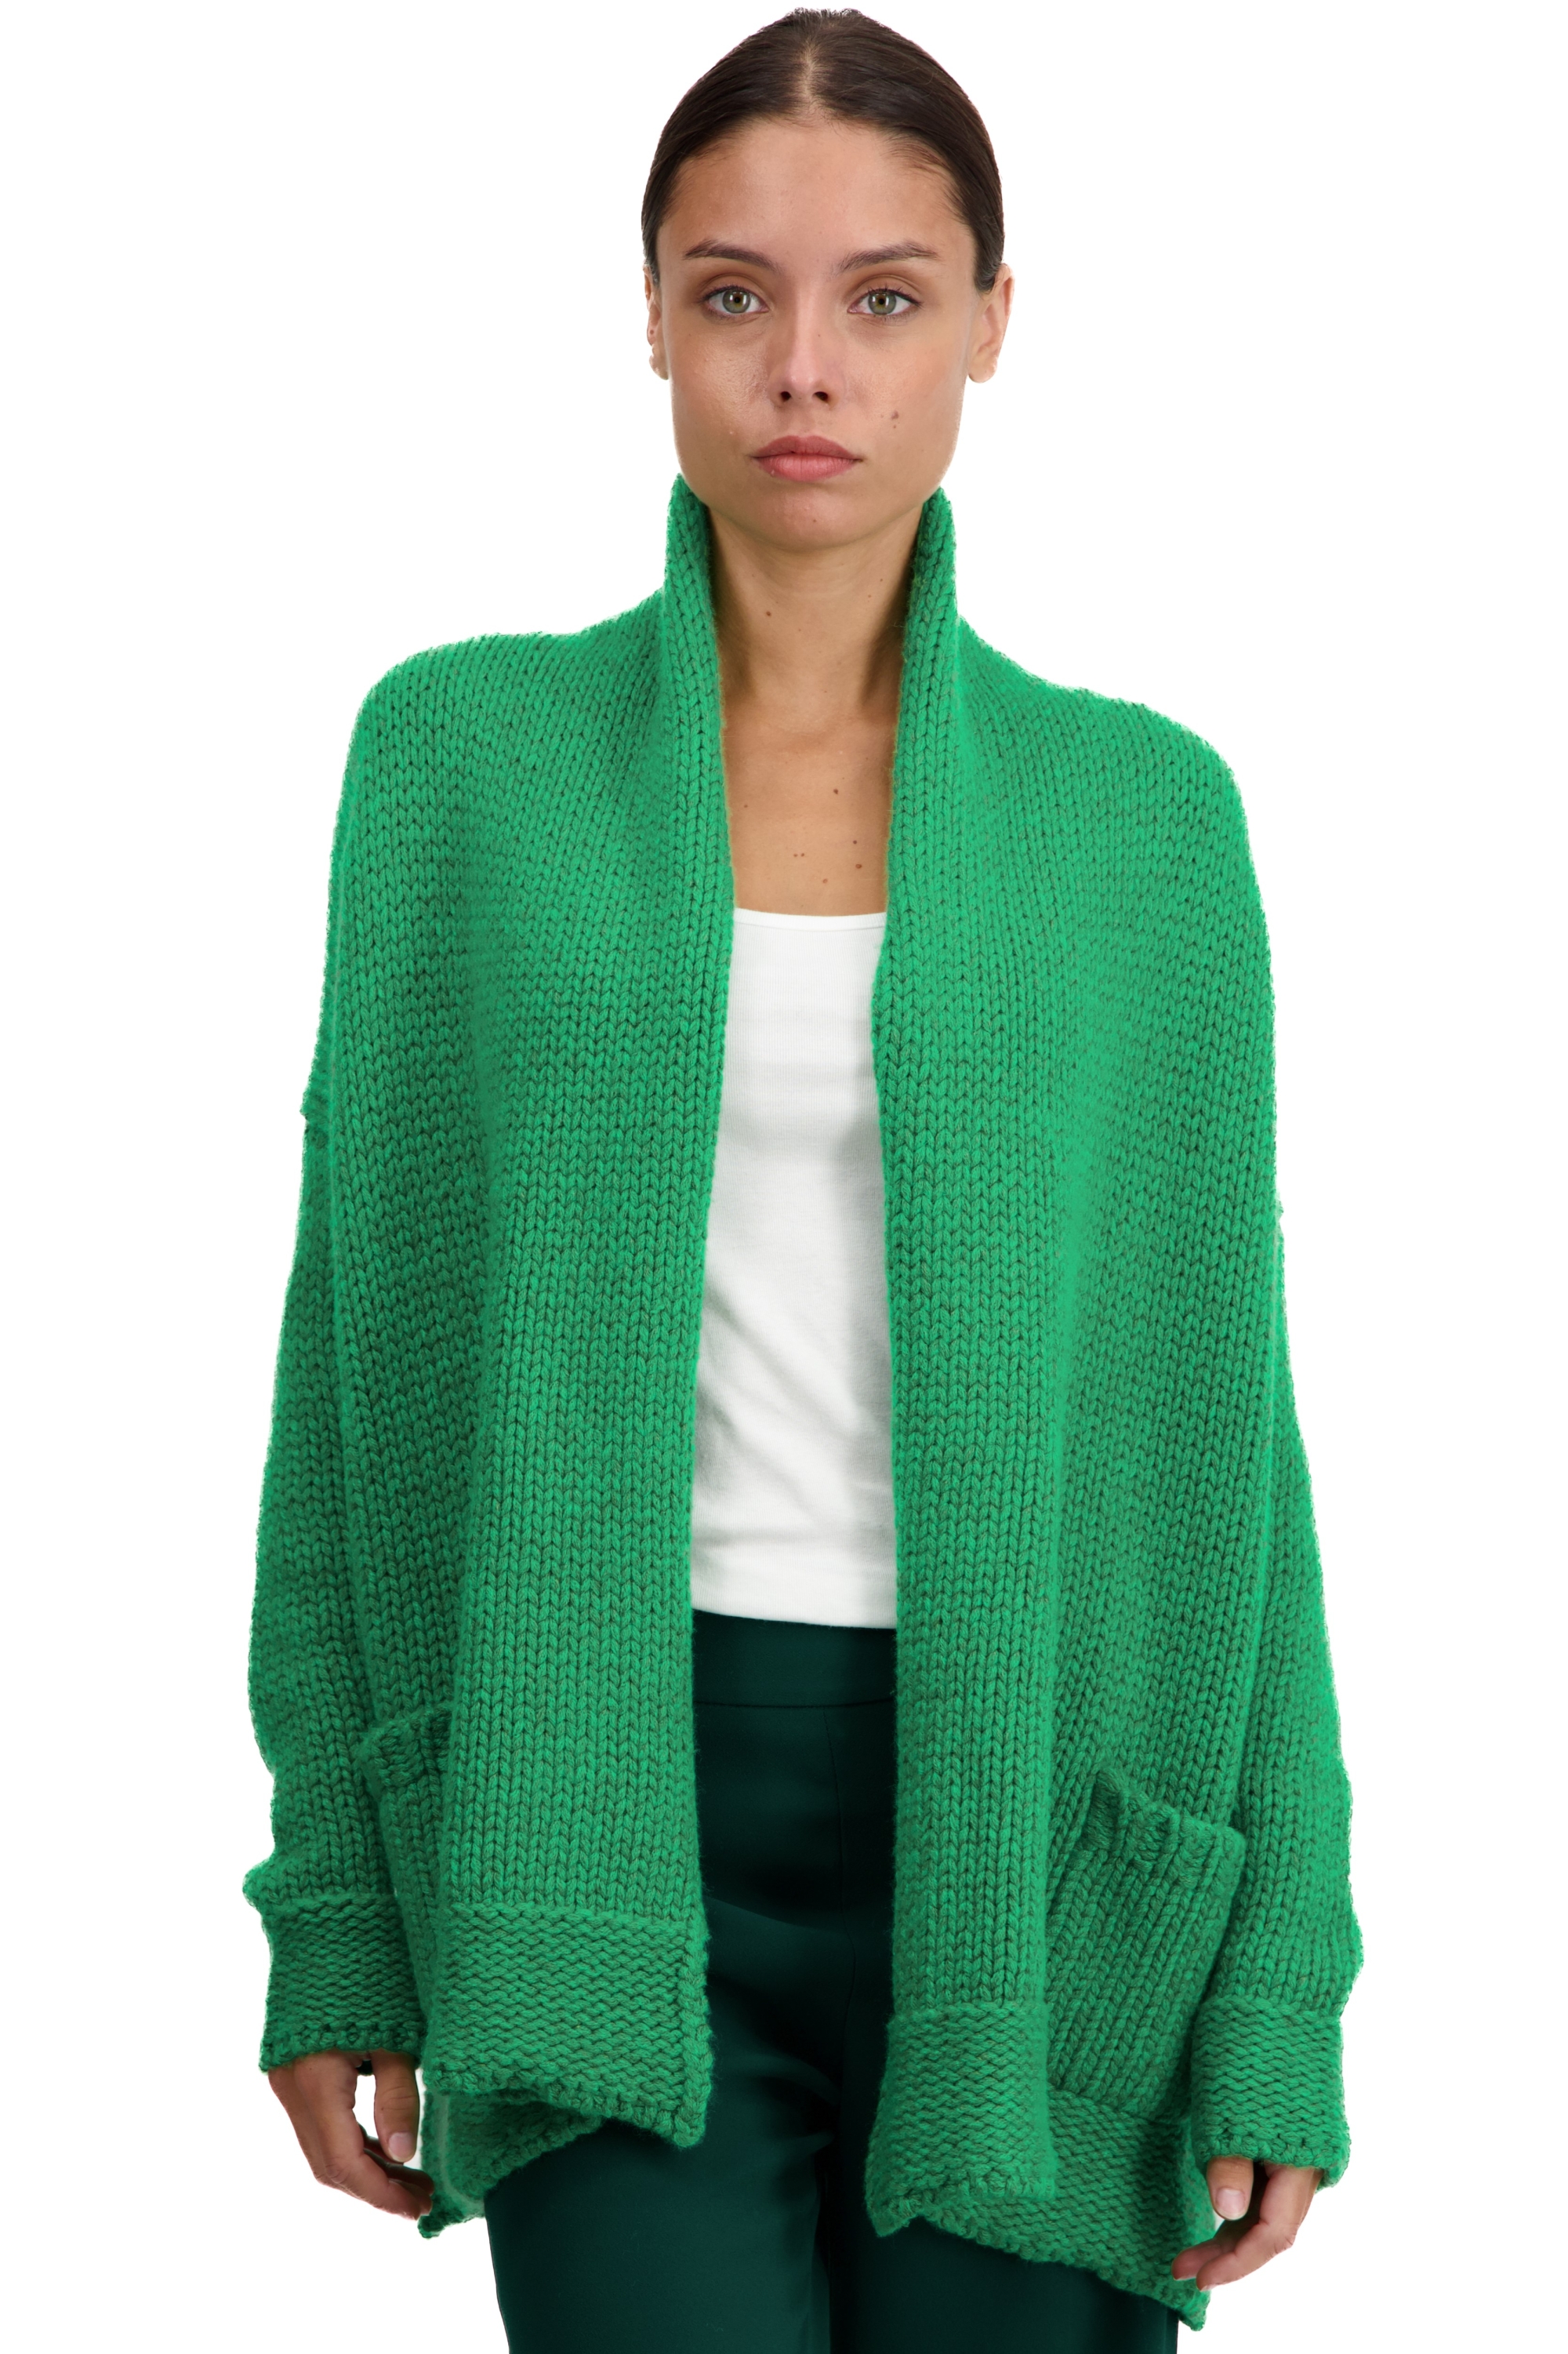 Cashmere ladies cardigans vienne basil new green s